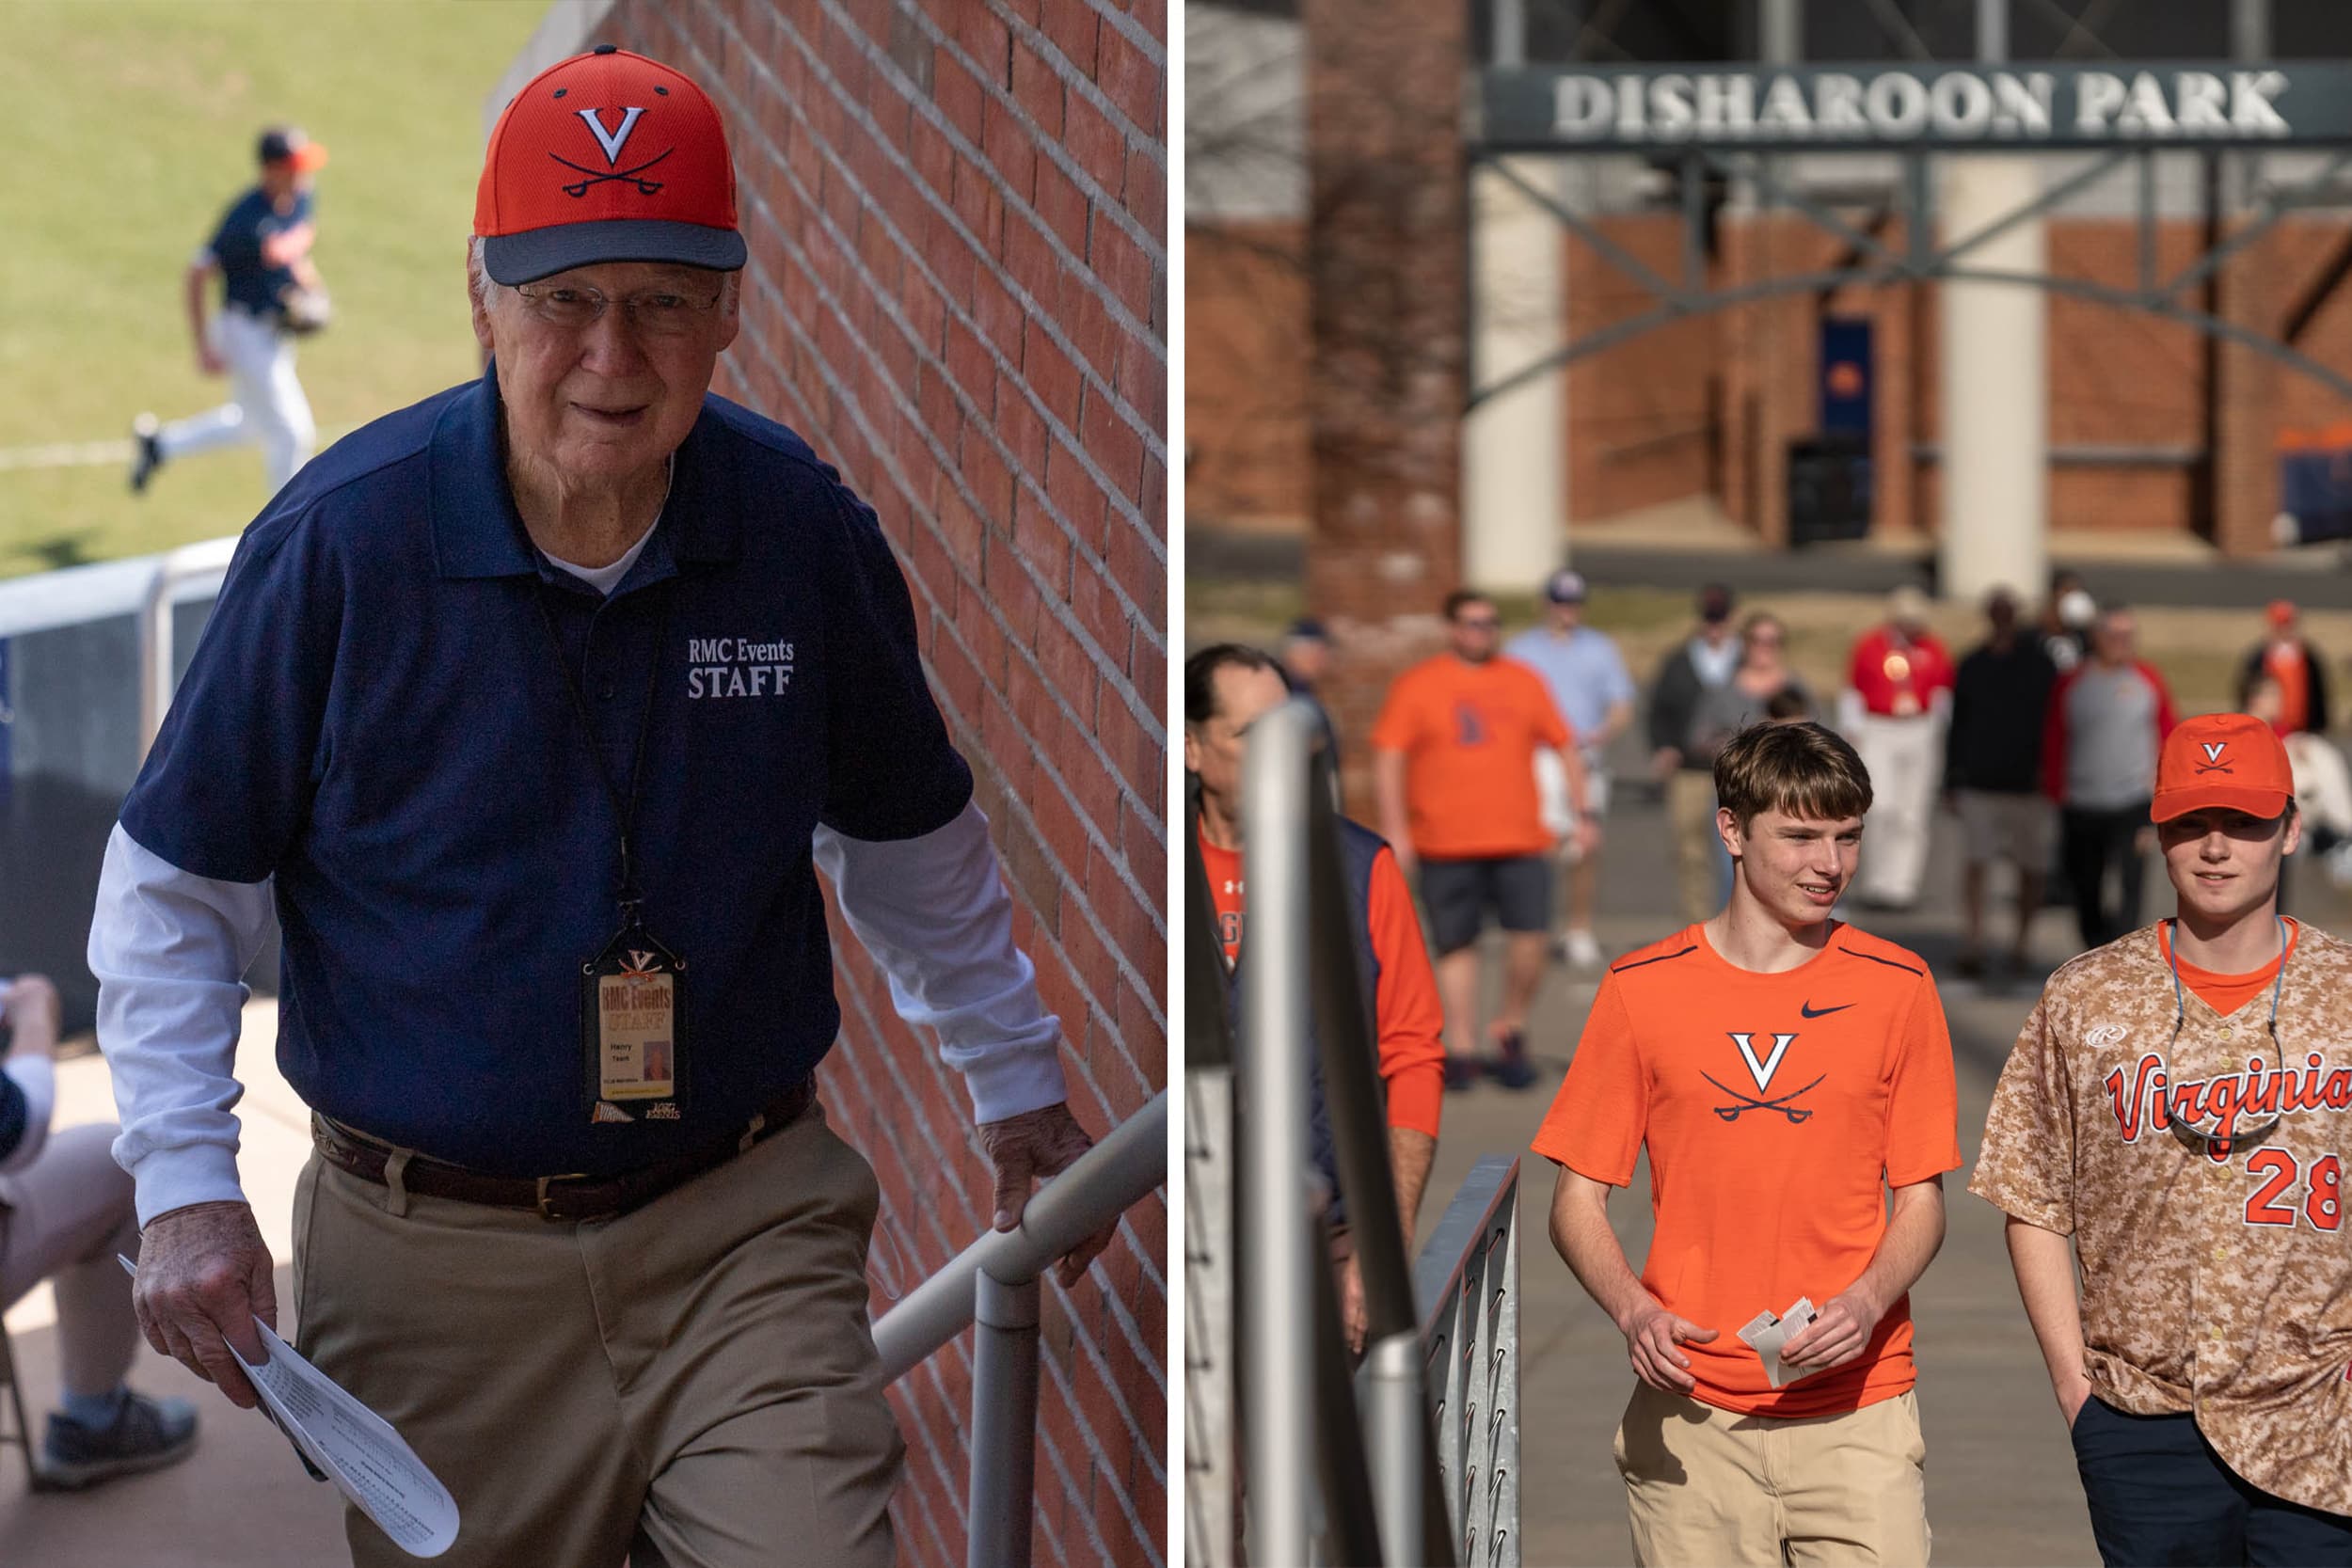 RMC Event staff member walking up the stairs left and UVA fans walking out of Disharoon Park right